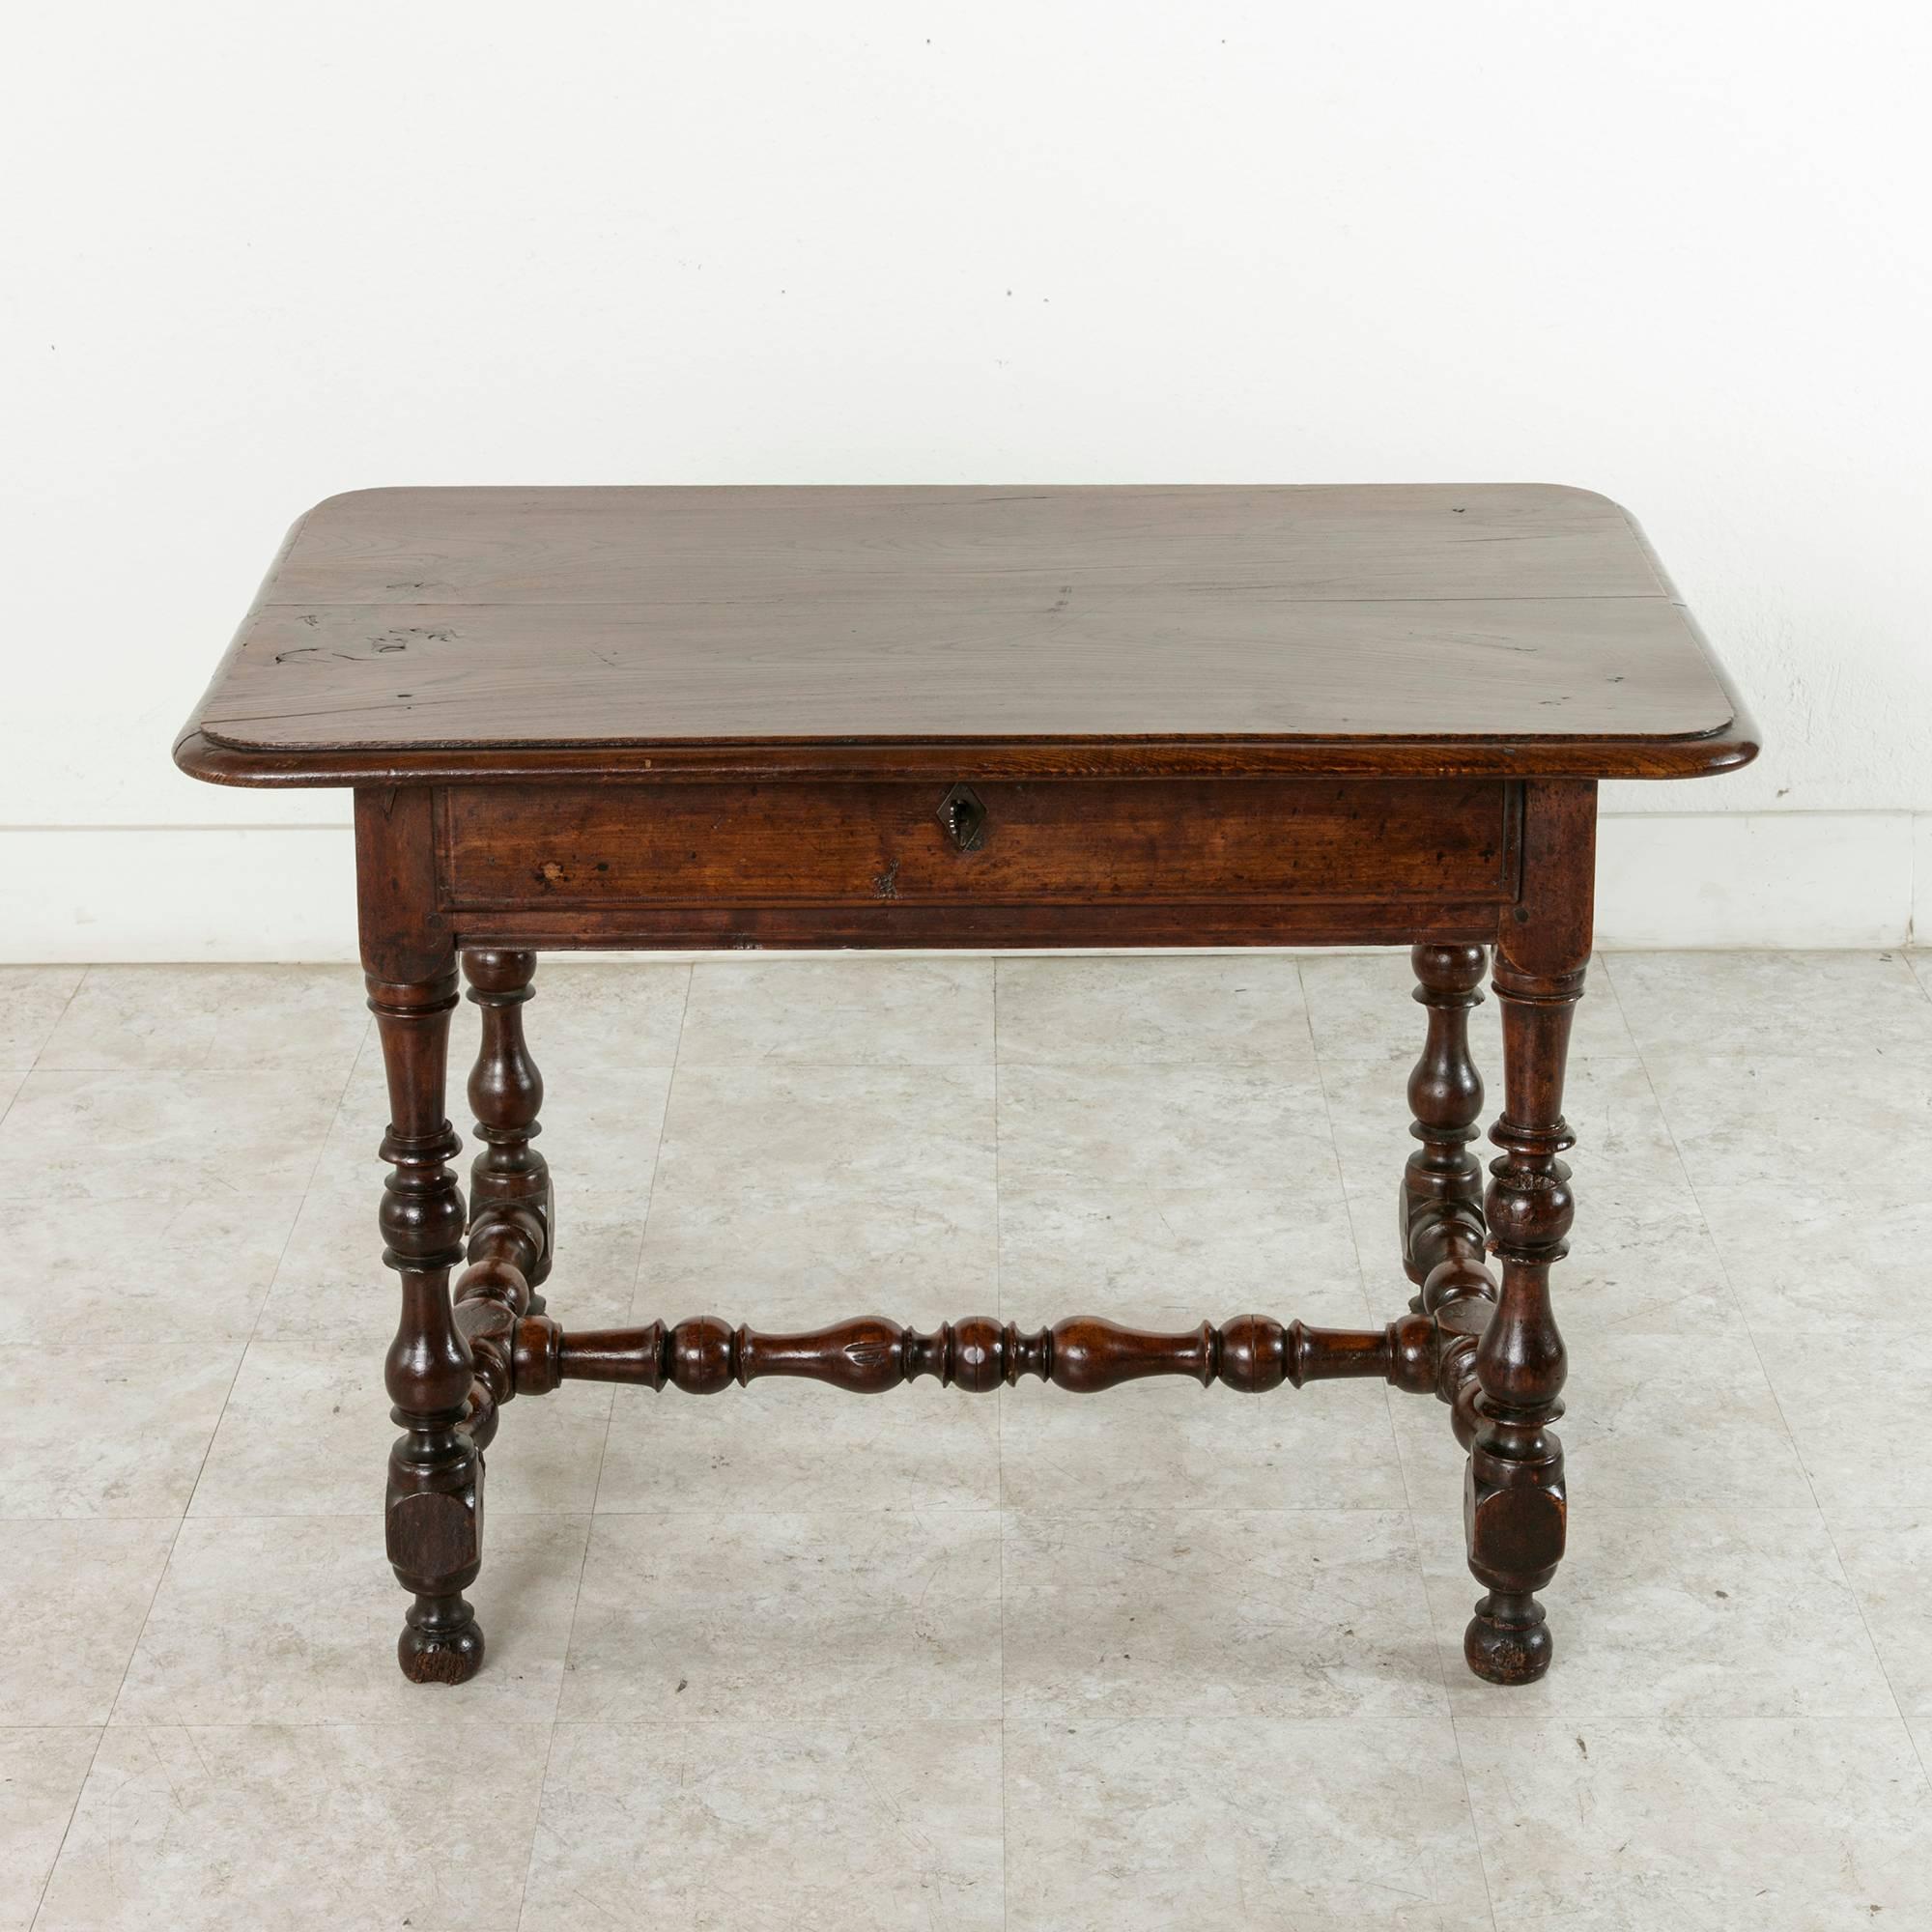 This Louis XIII style hand pegged oak table from the late 18th century features turned legs resting on ball feet and joined by an H-stretcher. Its top is made of two 14 inch wide planks, and its single drawer of dovetail construction is finished